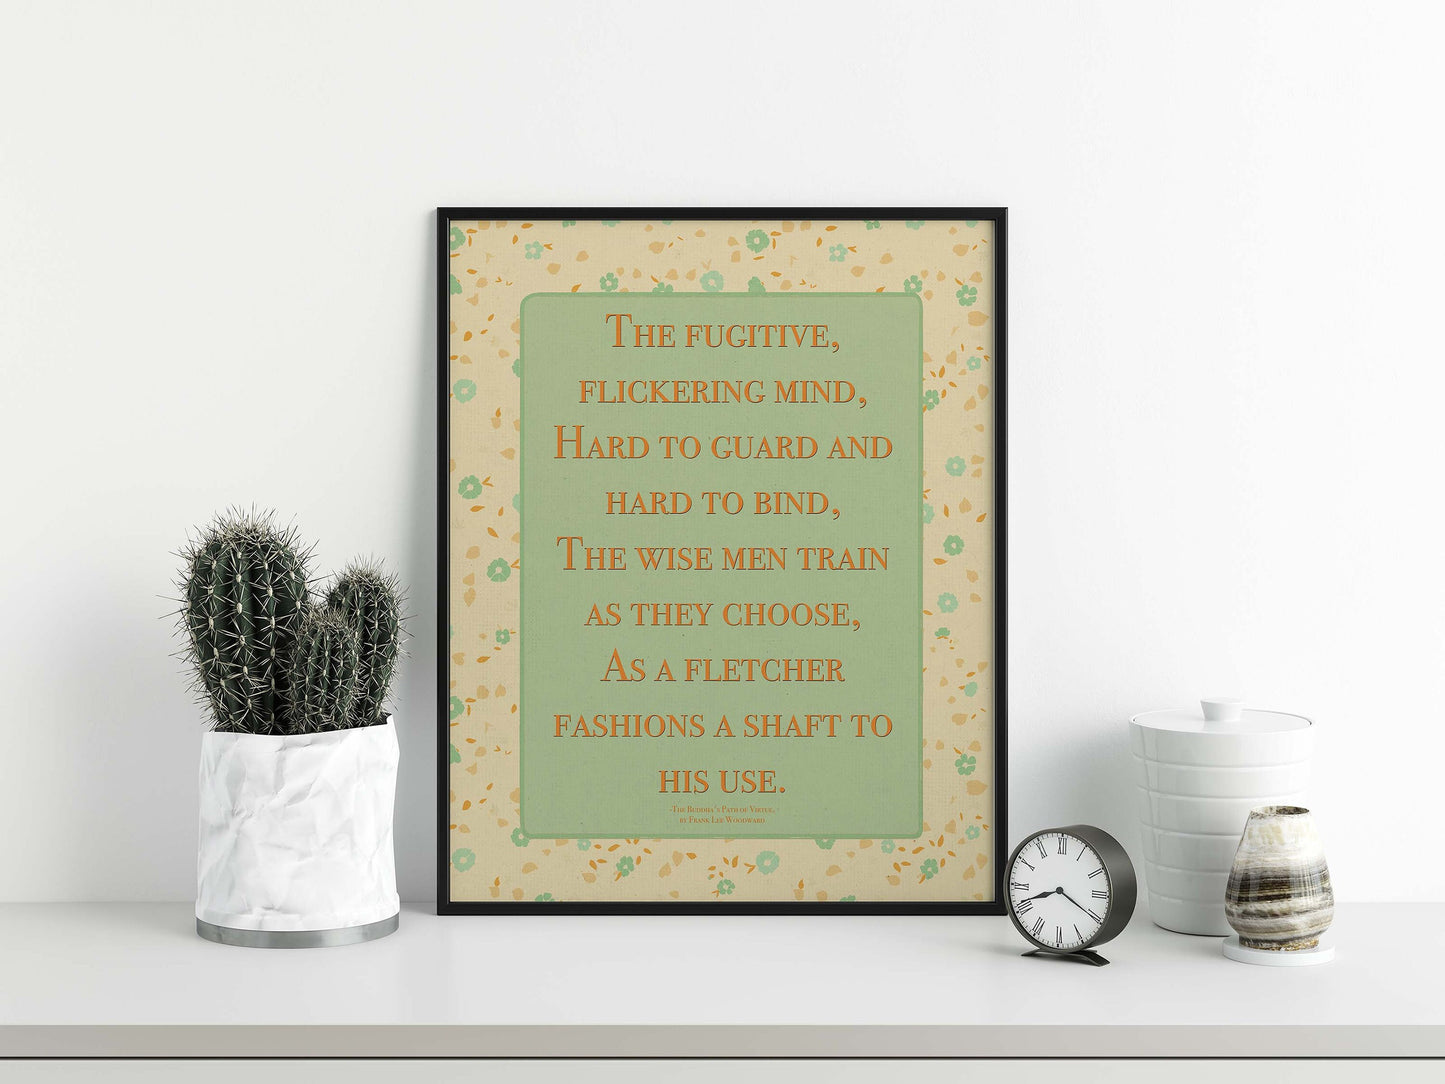 Dhammapada quote on mind poster in pastel colors with floral design in black frame display